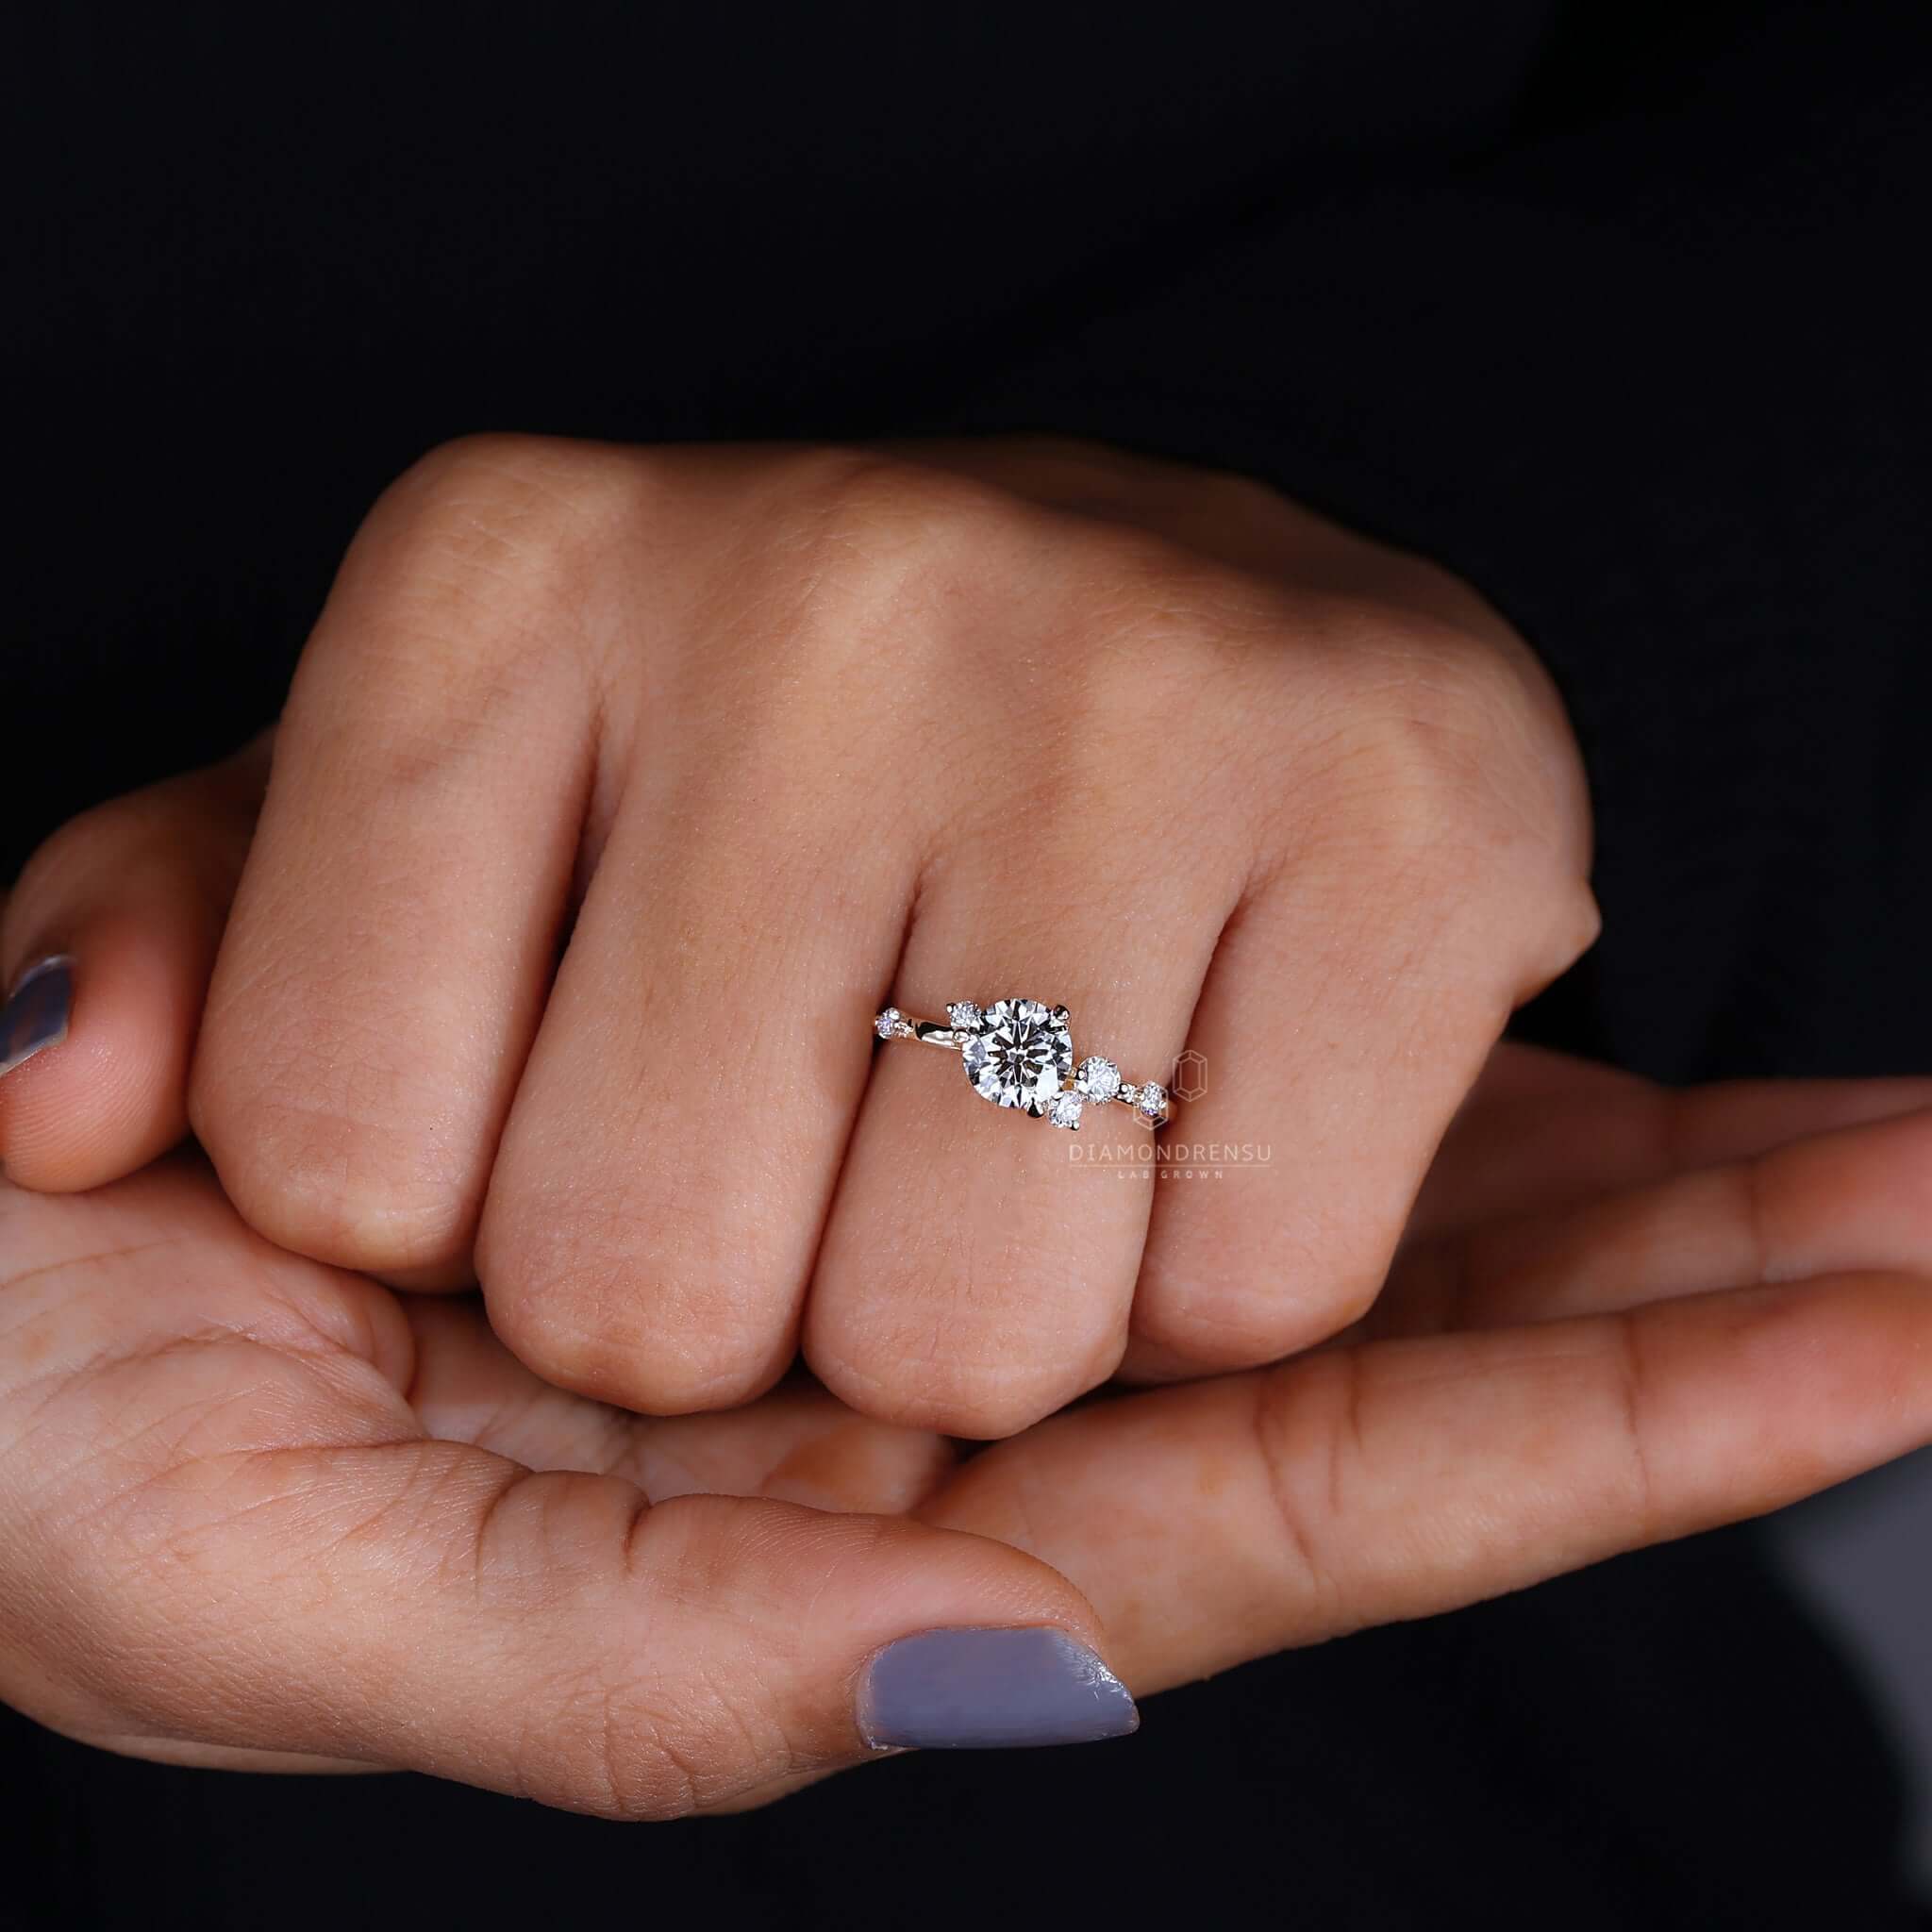 Glamorous cluster diamond ring against a soft background, reflecting its timeless appeal.